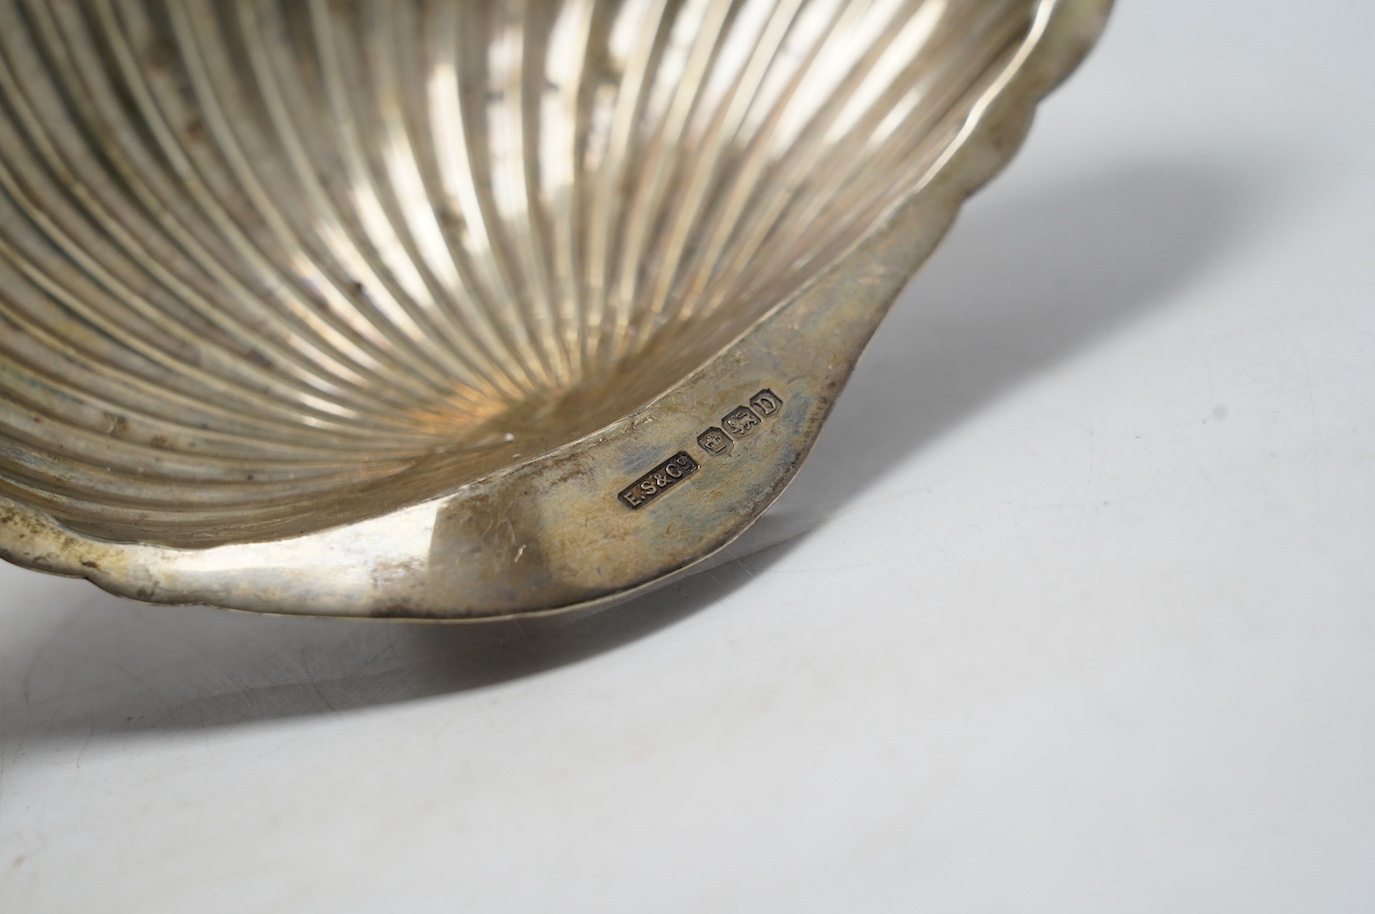 A George VI silver shell dish, Sheffield, 1946, 14.2cm, a modern silver mounted wine coaster and a late Victorian silver five bar toast rack. Condition - fair